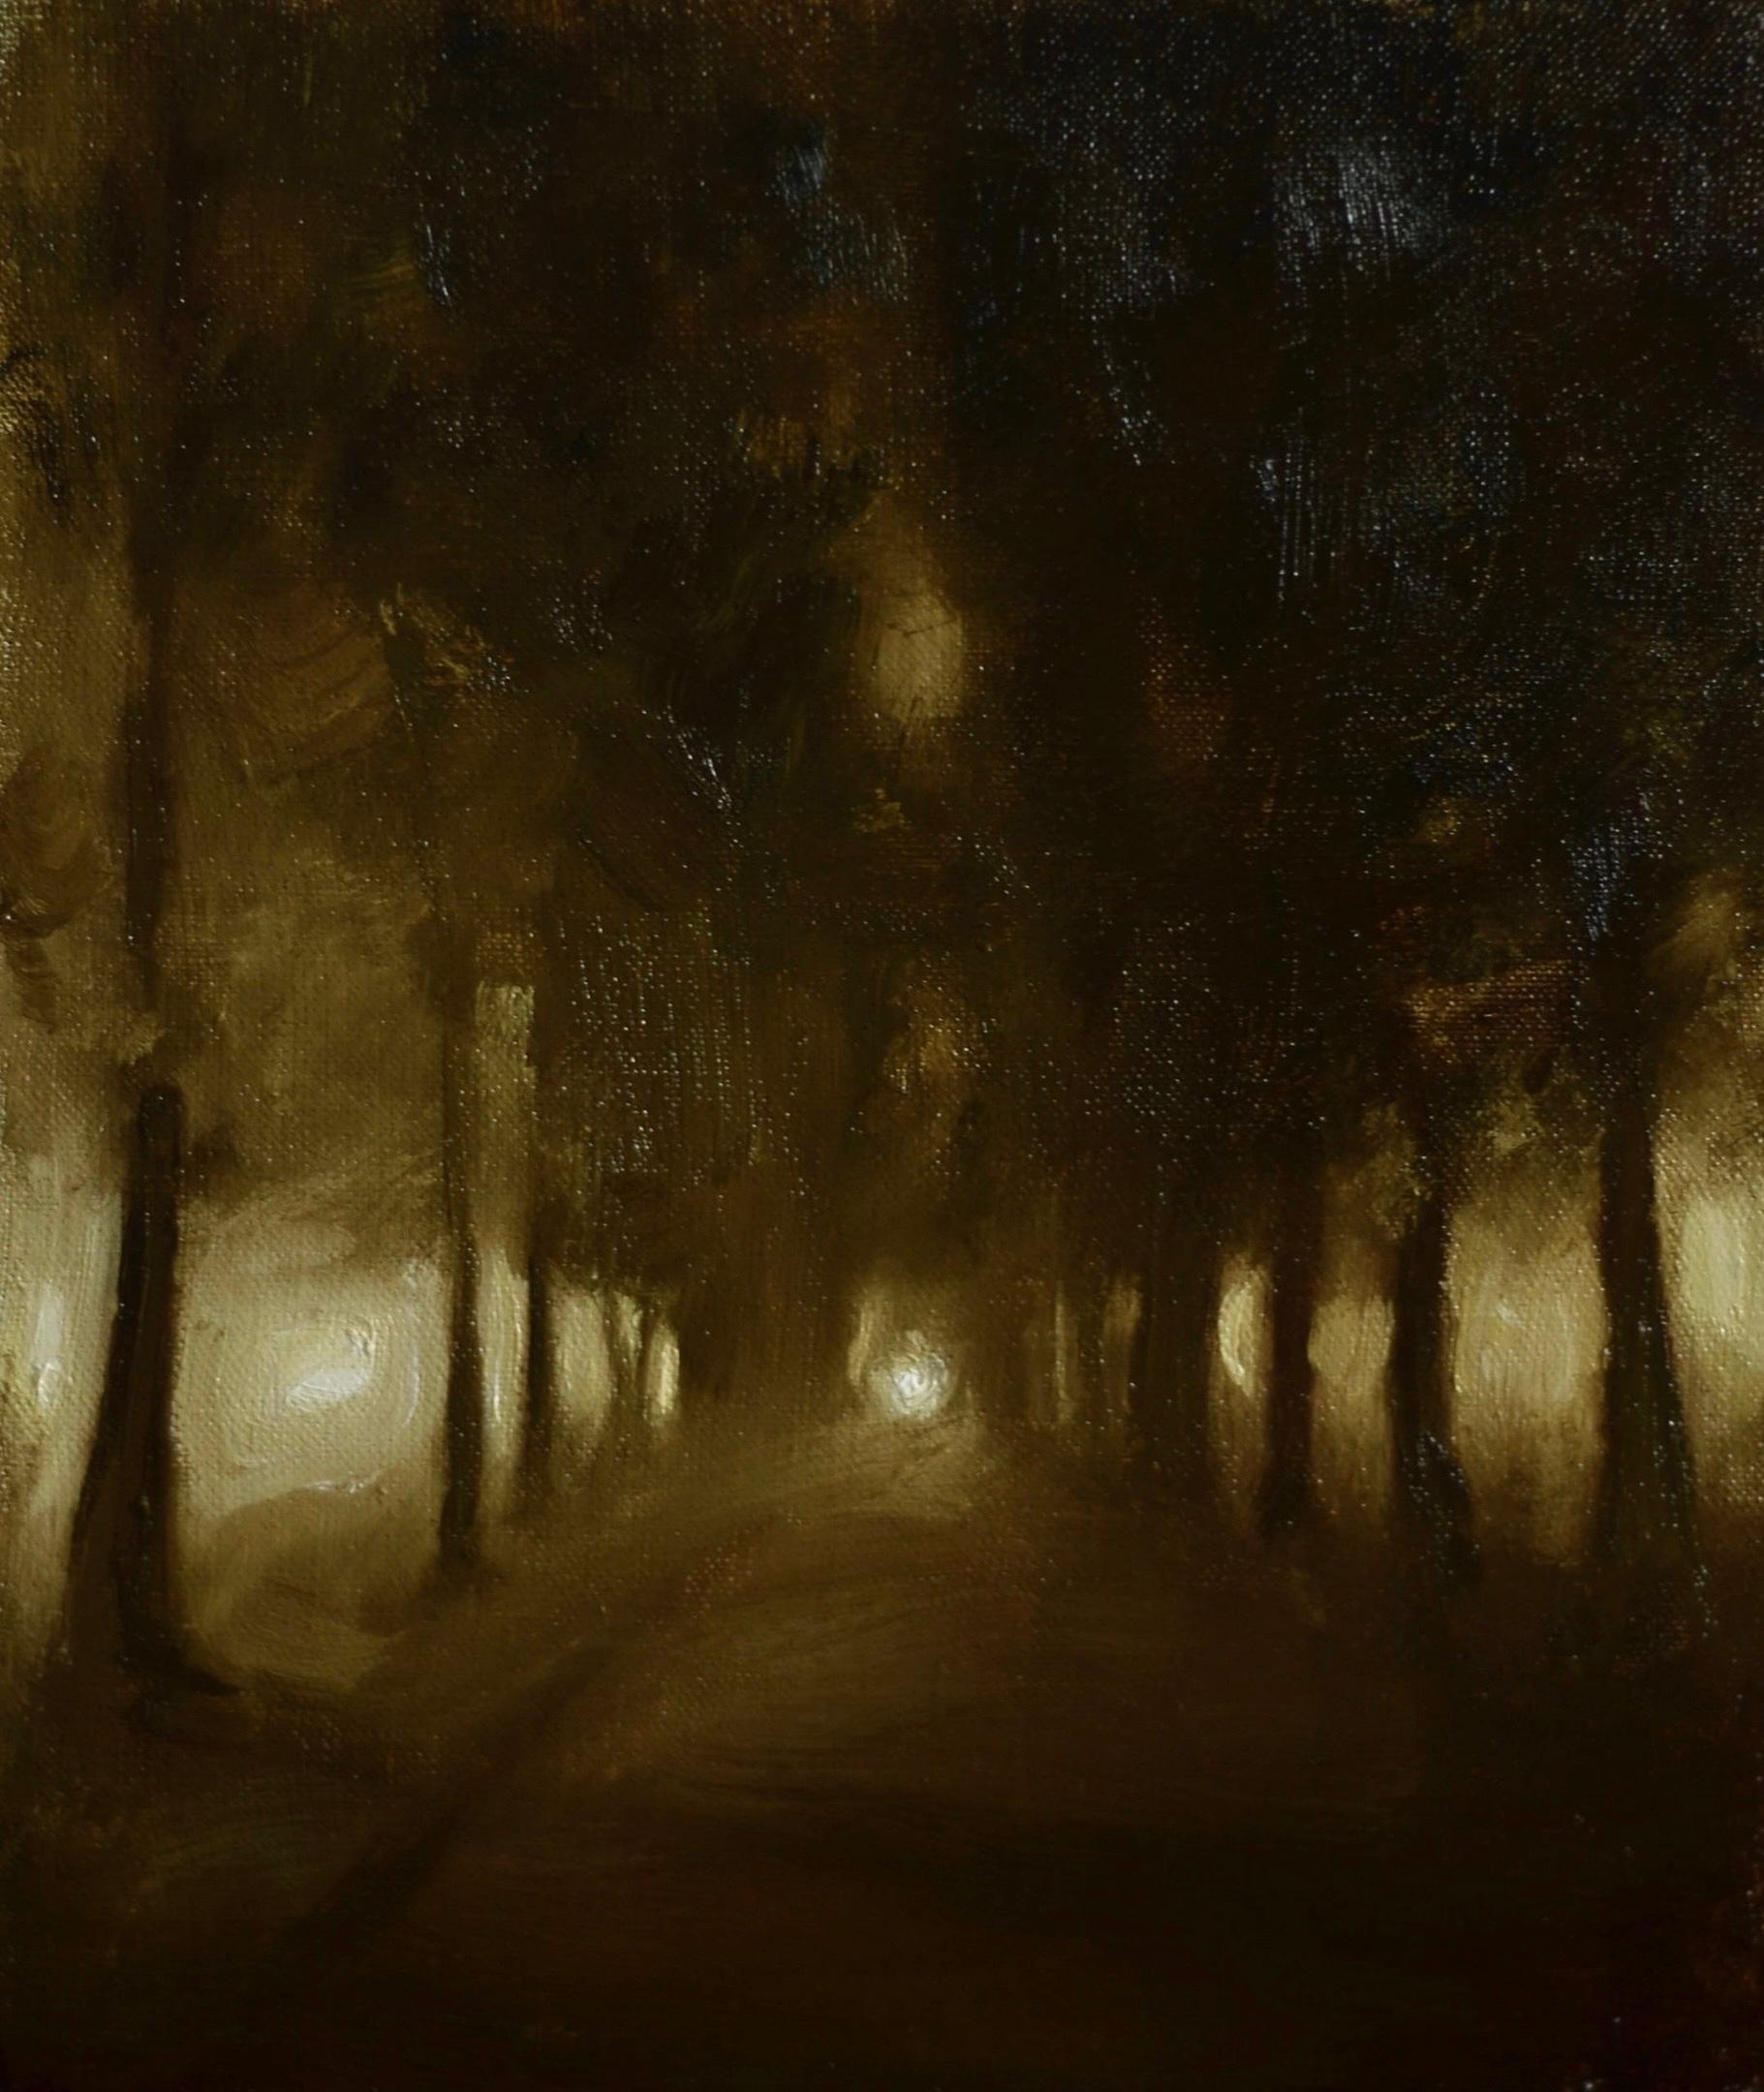 Ksenya Istomina Figurative Painting - Night street- 21st Century Still-life Painting of a road with trees in the dark.